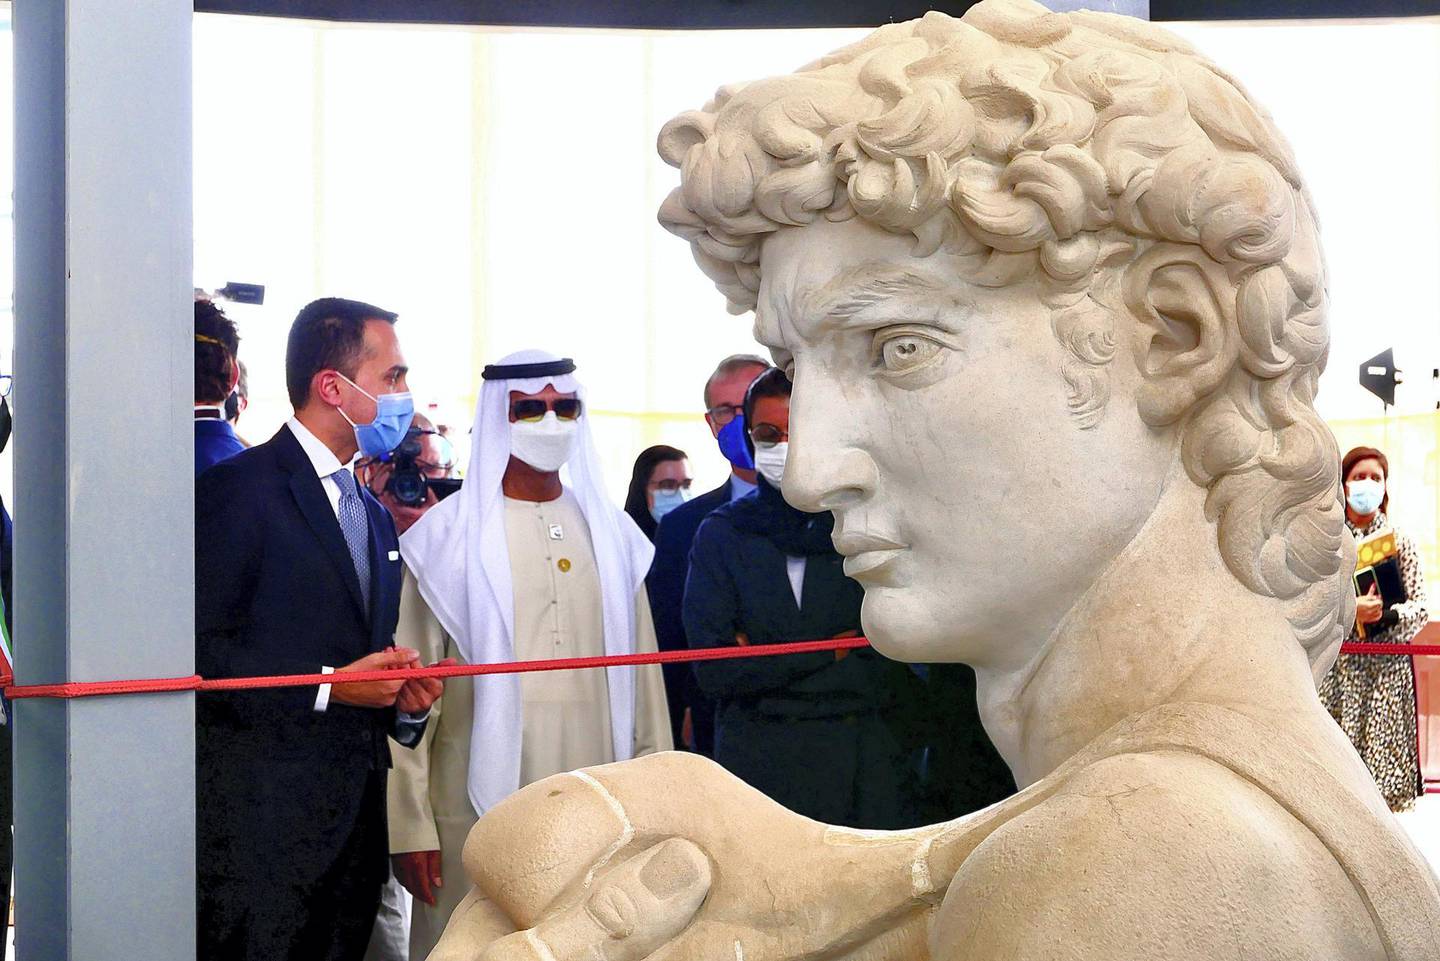 David statue unveiled at the Italy pavilion at EXPO 2020 site in Dubai on April 27,2021. Sheikh Nahyan bin Mubarak Al Nahyan the UAE’s minister of tolerance, Reem Al Hashimy, UAE Minister of State for International Cooperation and other guests were also present during the unveiling ceremony. (Pawan Singh/The National) Story by Ramola